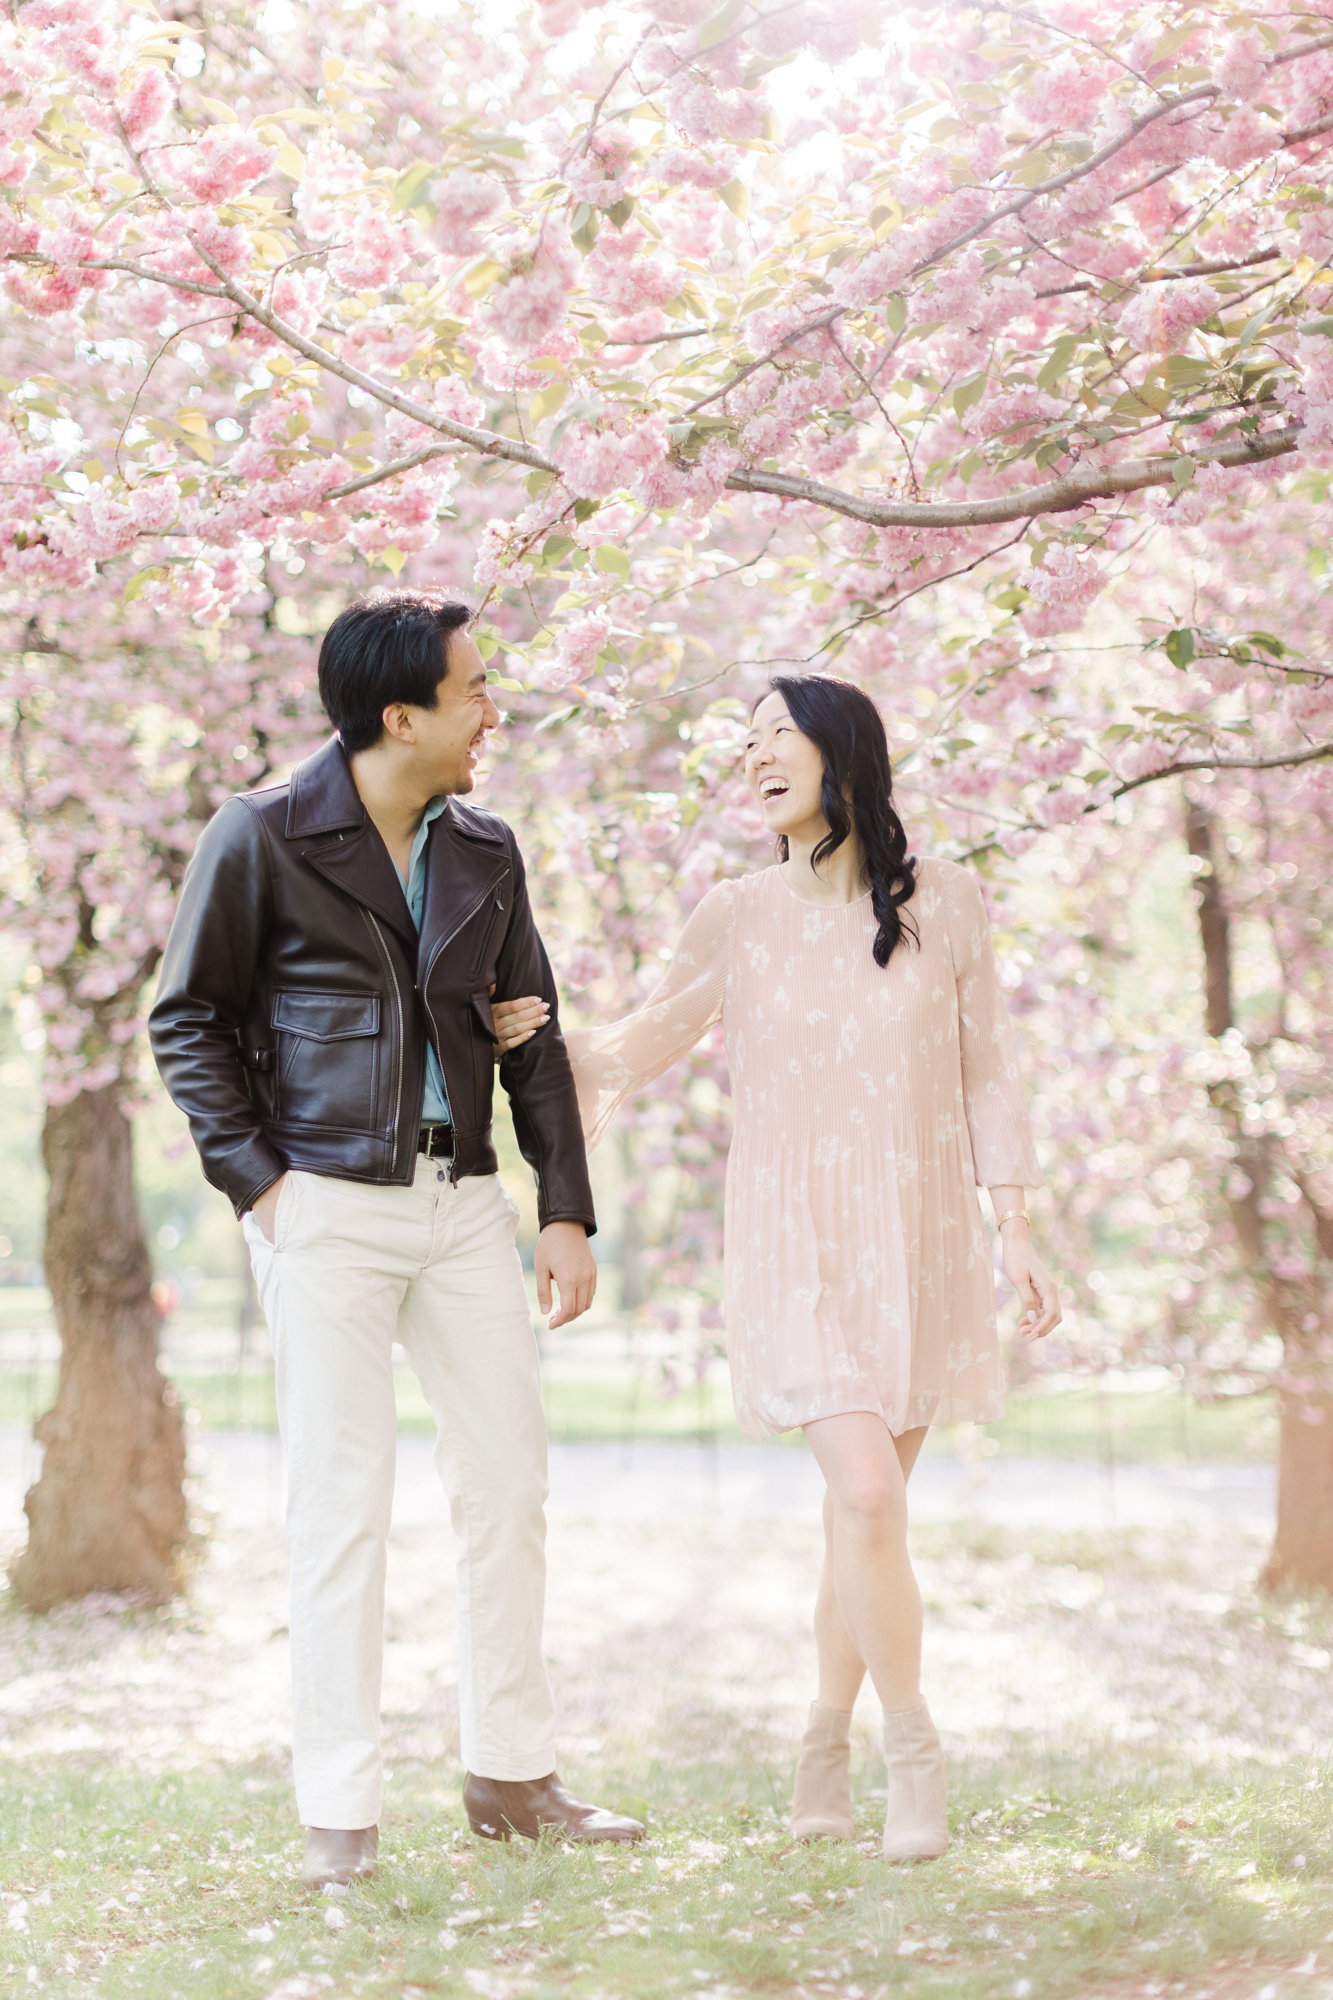 Joyful Engagement Photos With Cherry Blossoms in NYC